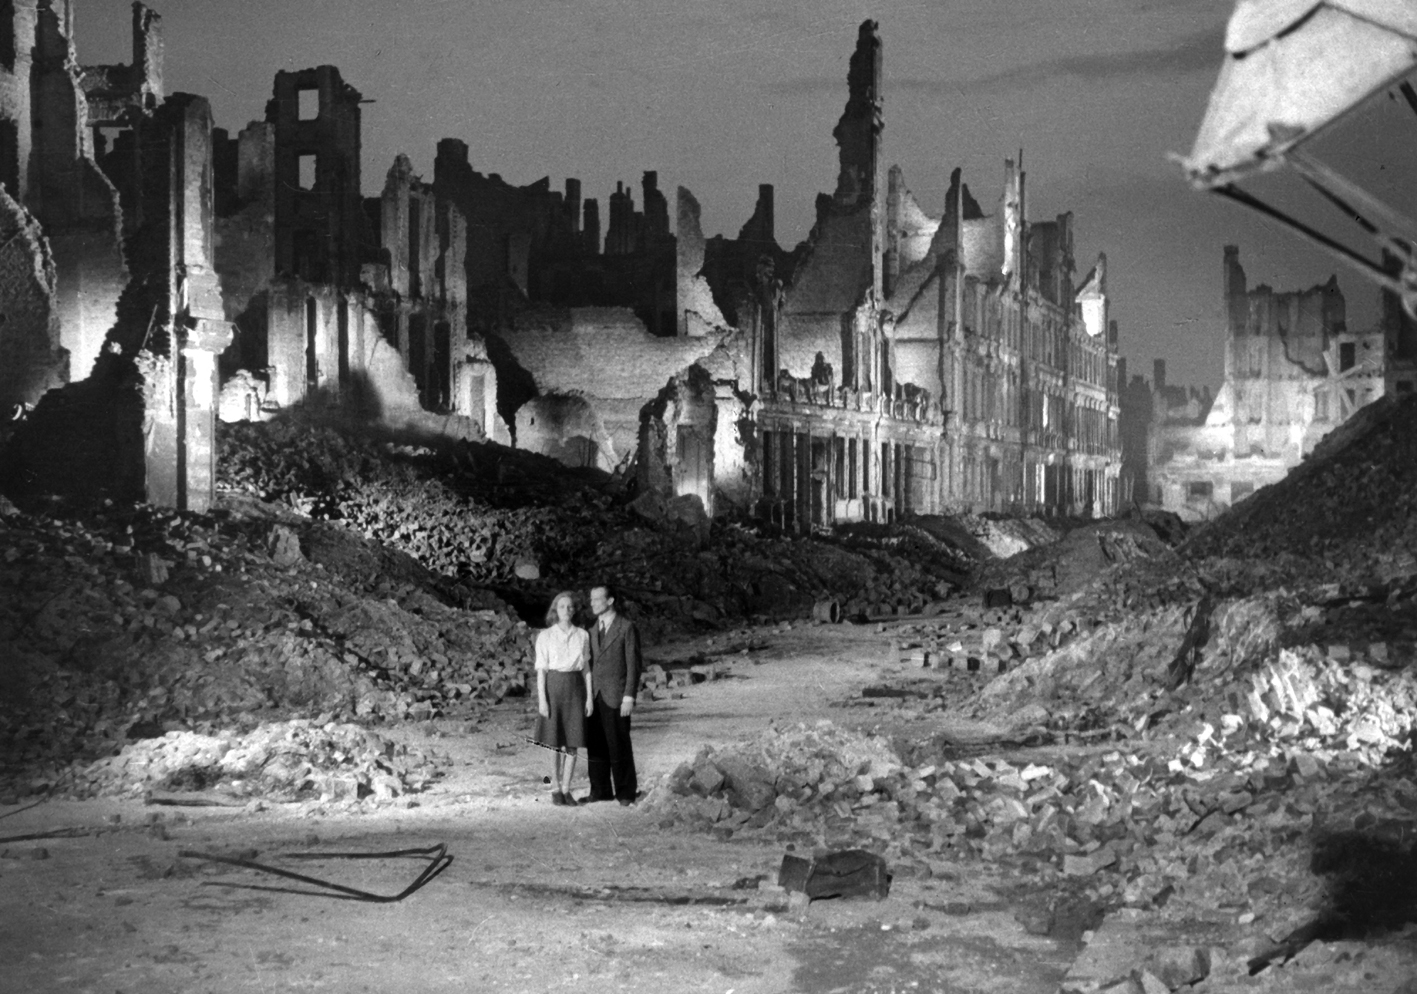 A man and woman are dwarfed by the city rubble surrounding them.